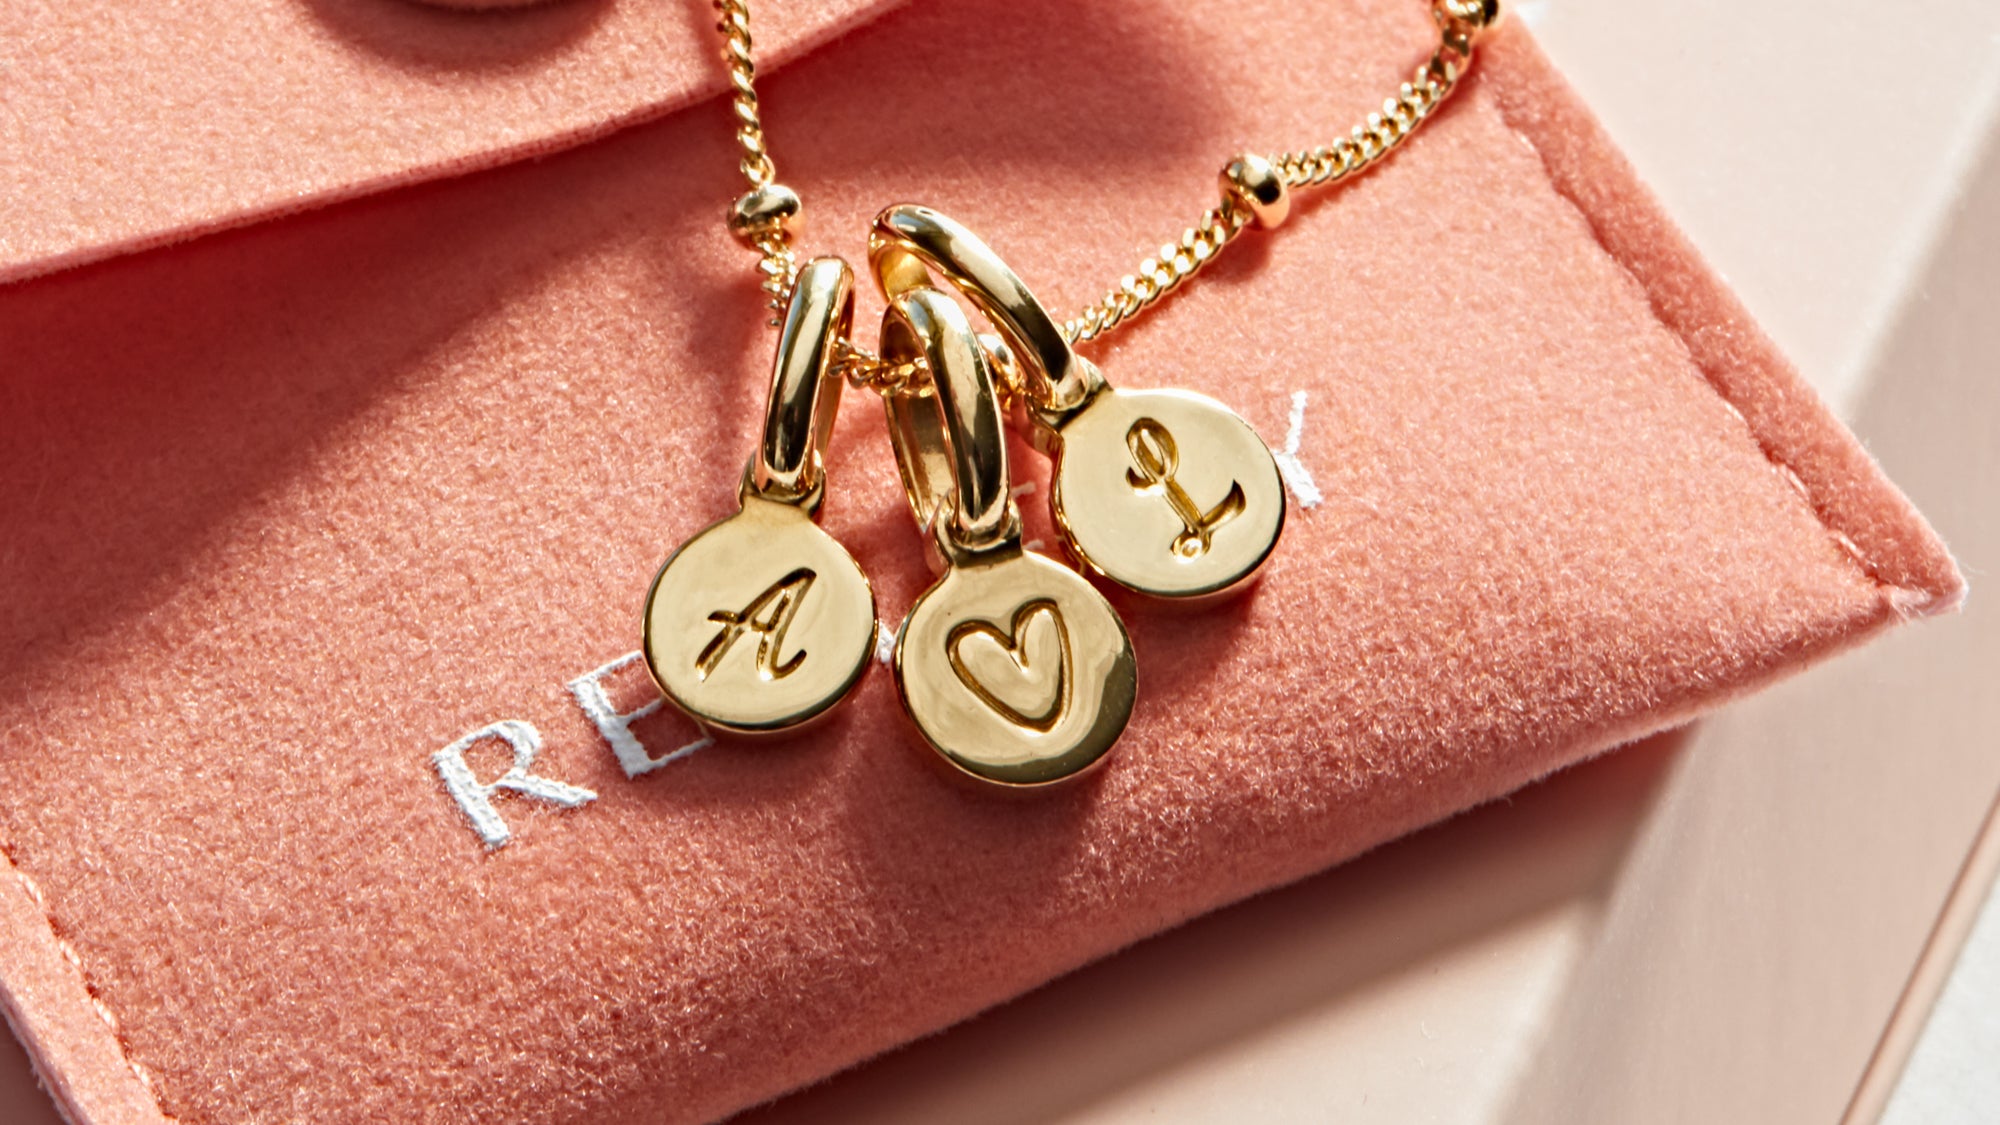 Disk necklace with initial A, heart symbol, and initial L